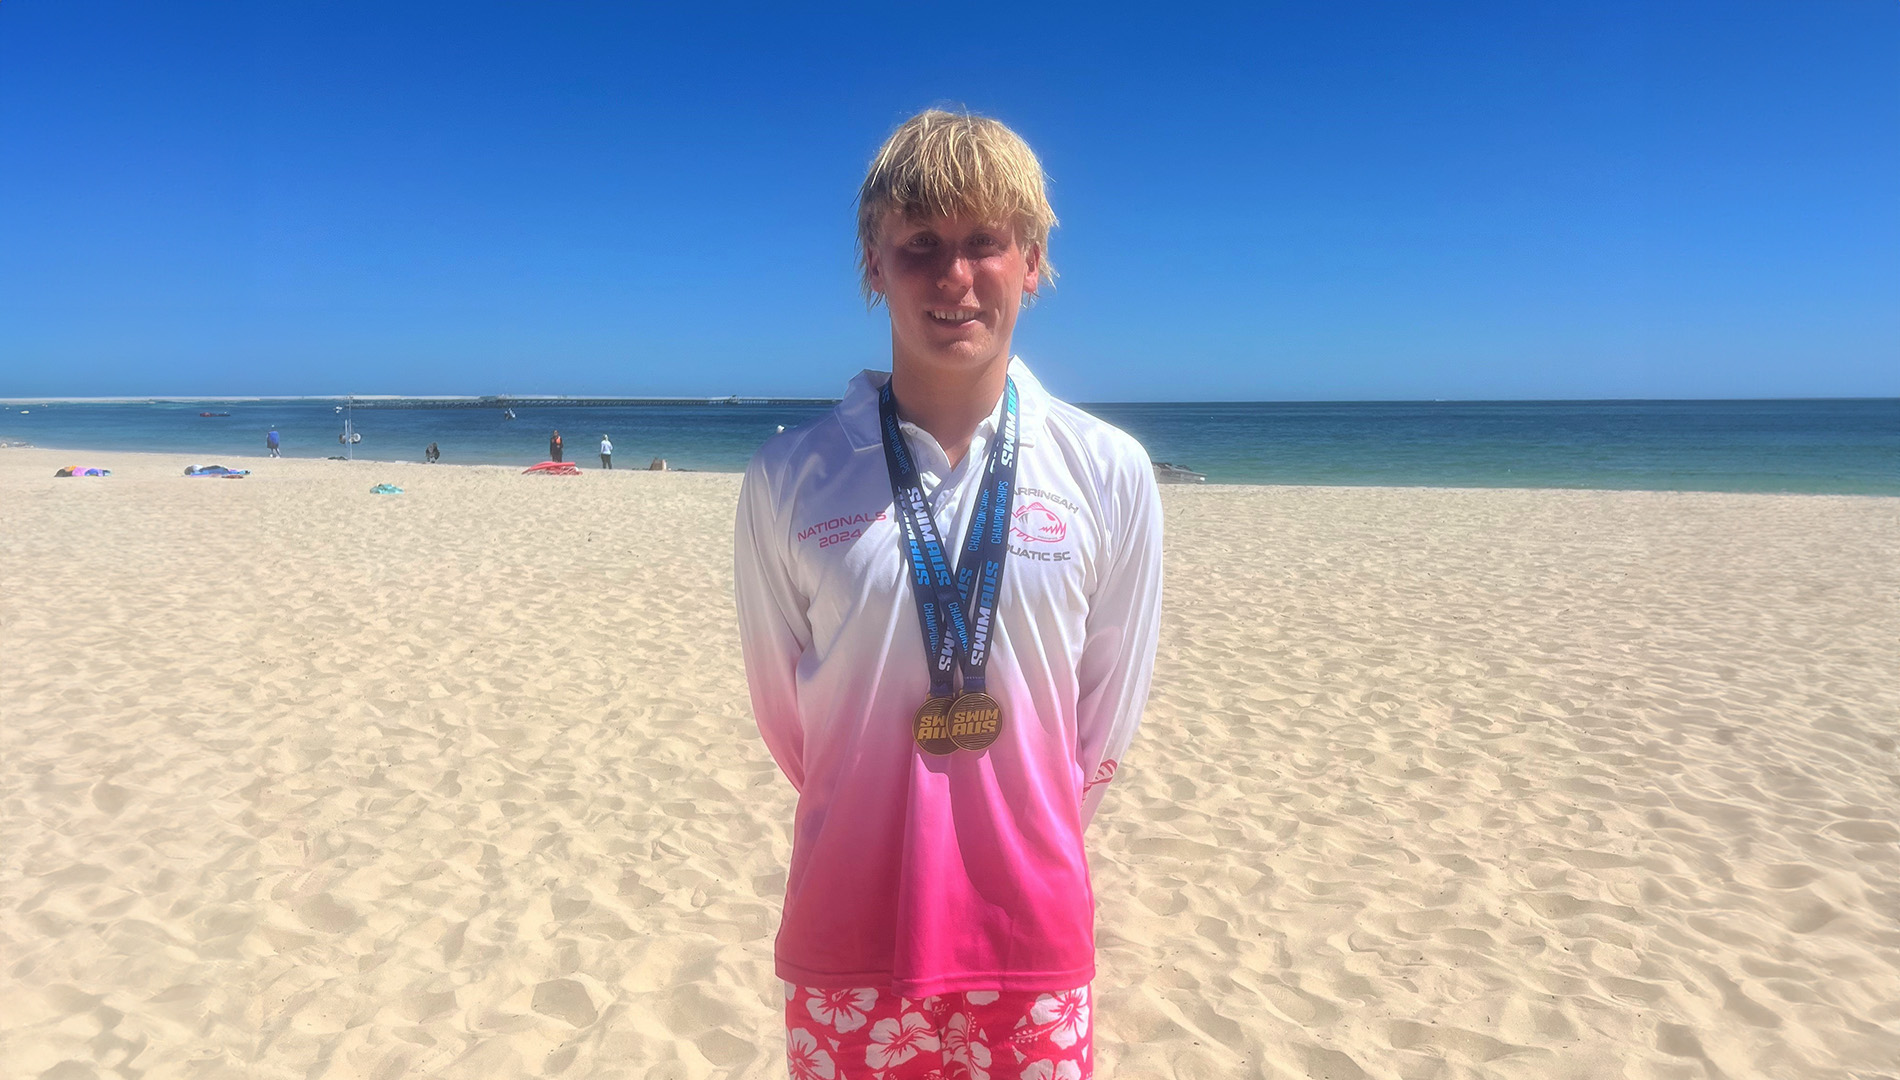 Luke standing on beach with medals.